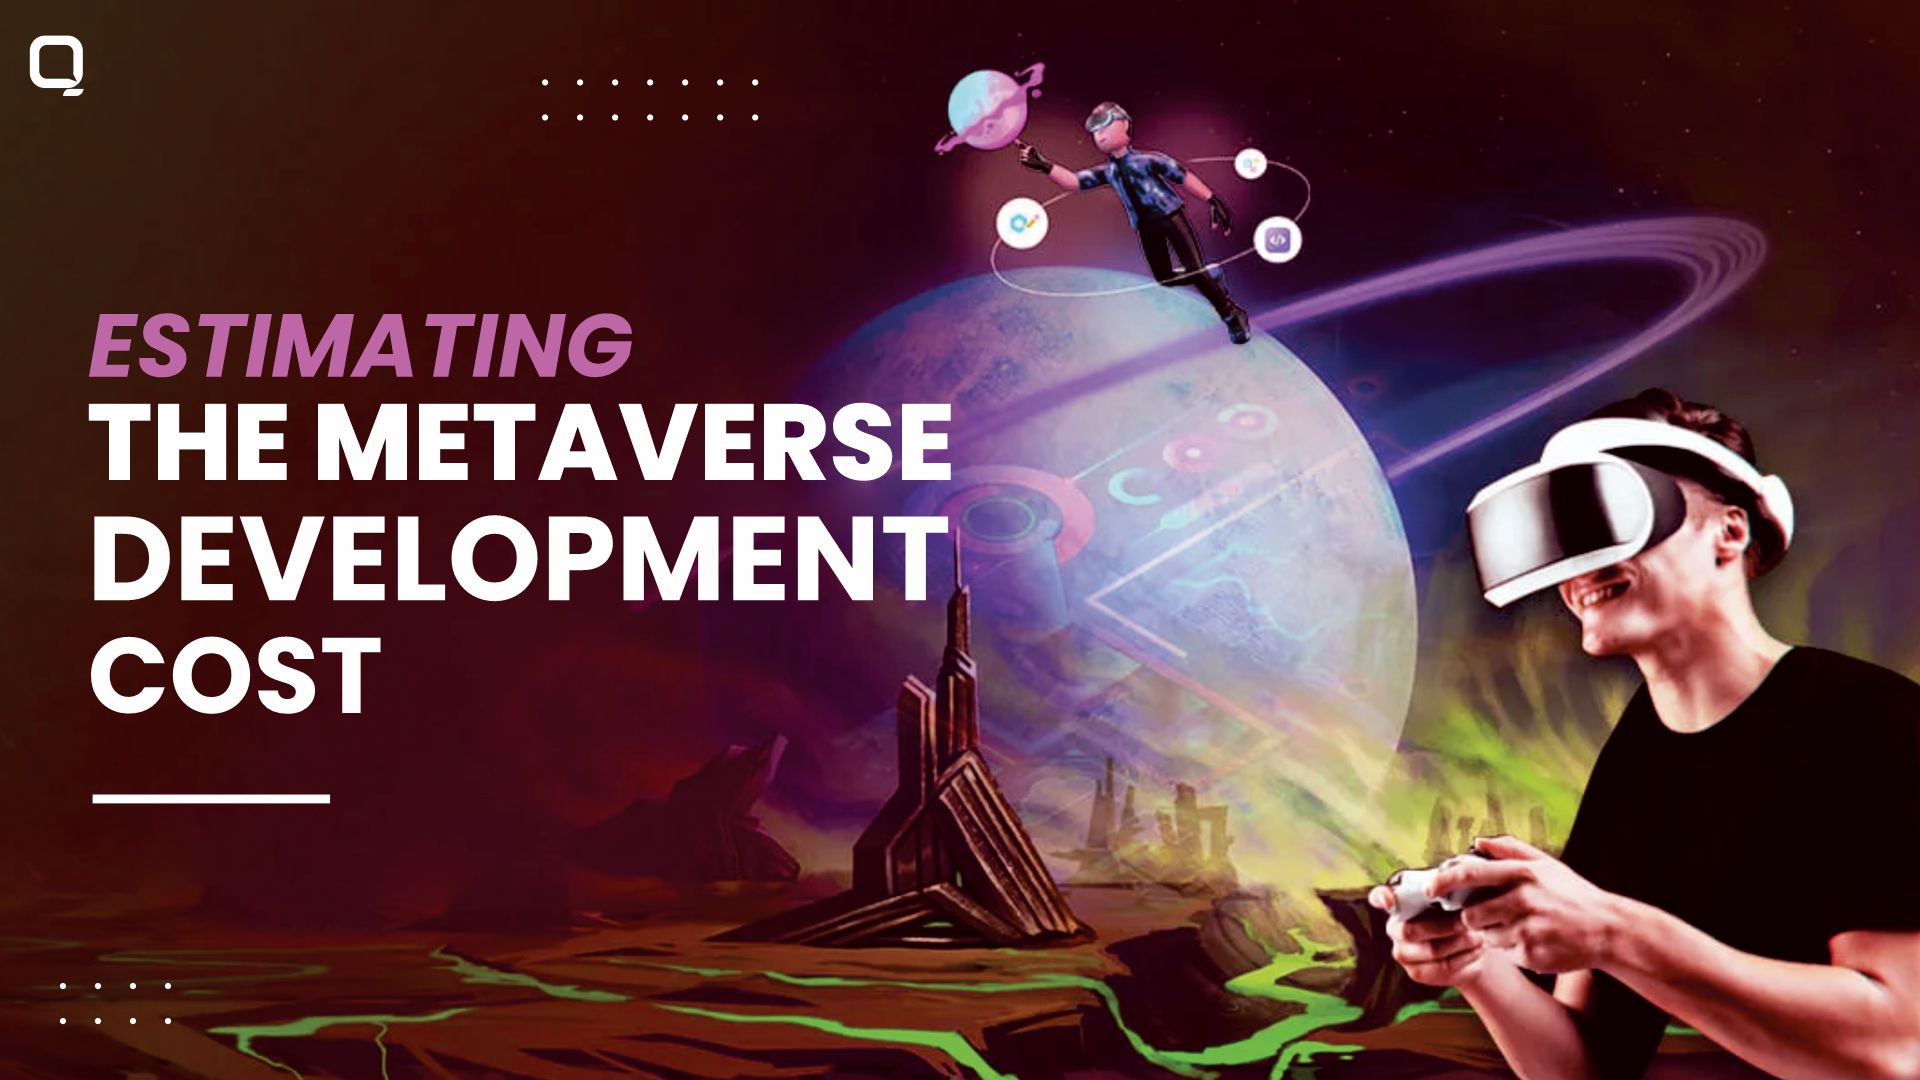 The emergence and staying power of the metaverse